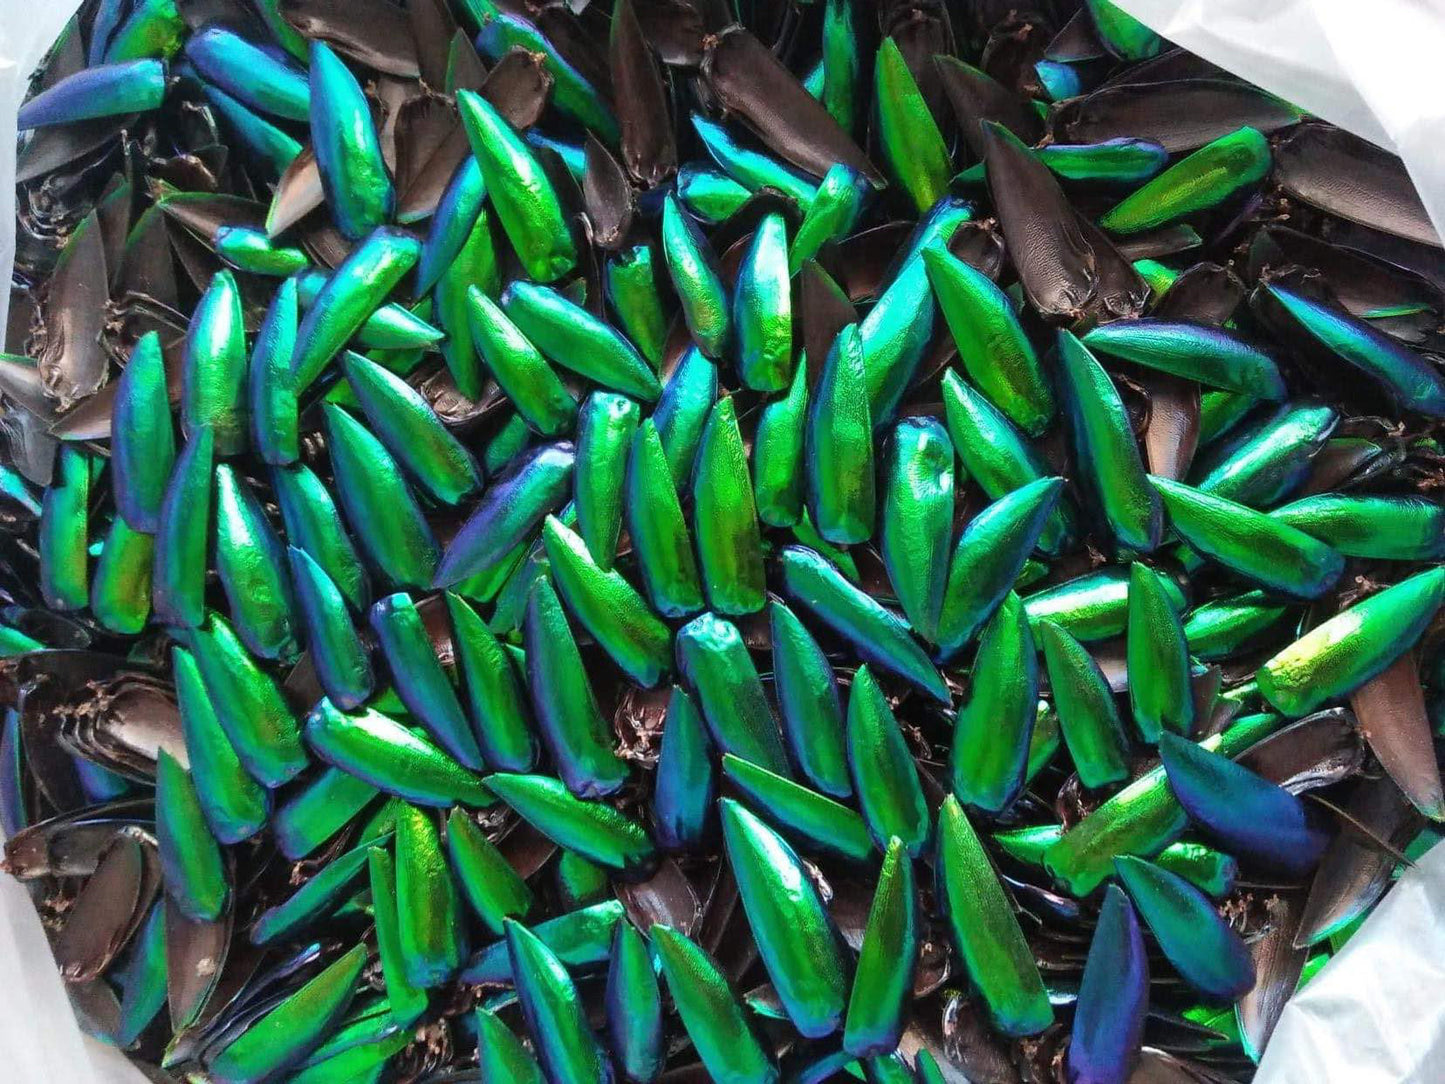 Jewel Beetle Wings UNDRILLED NO-HOLE Taxidermy Beads (500 Wings)